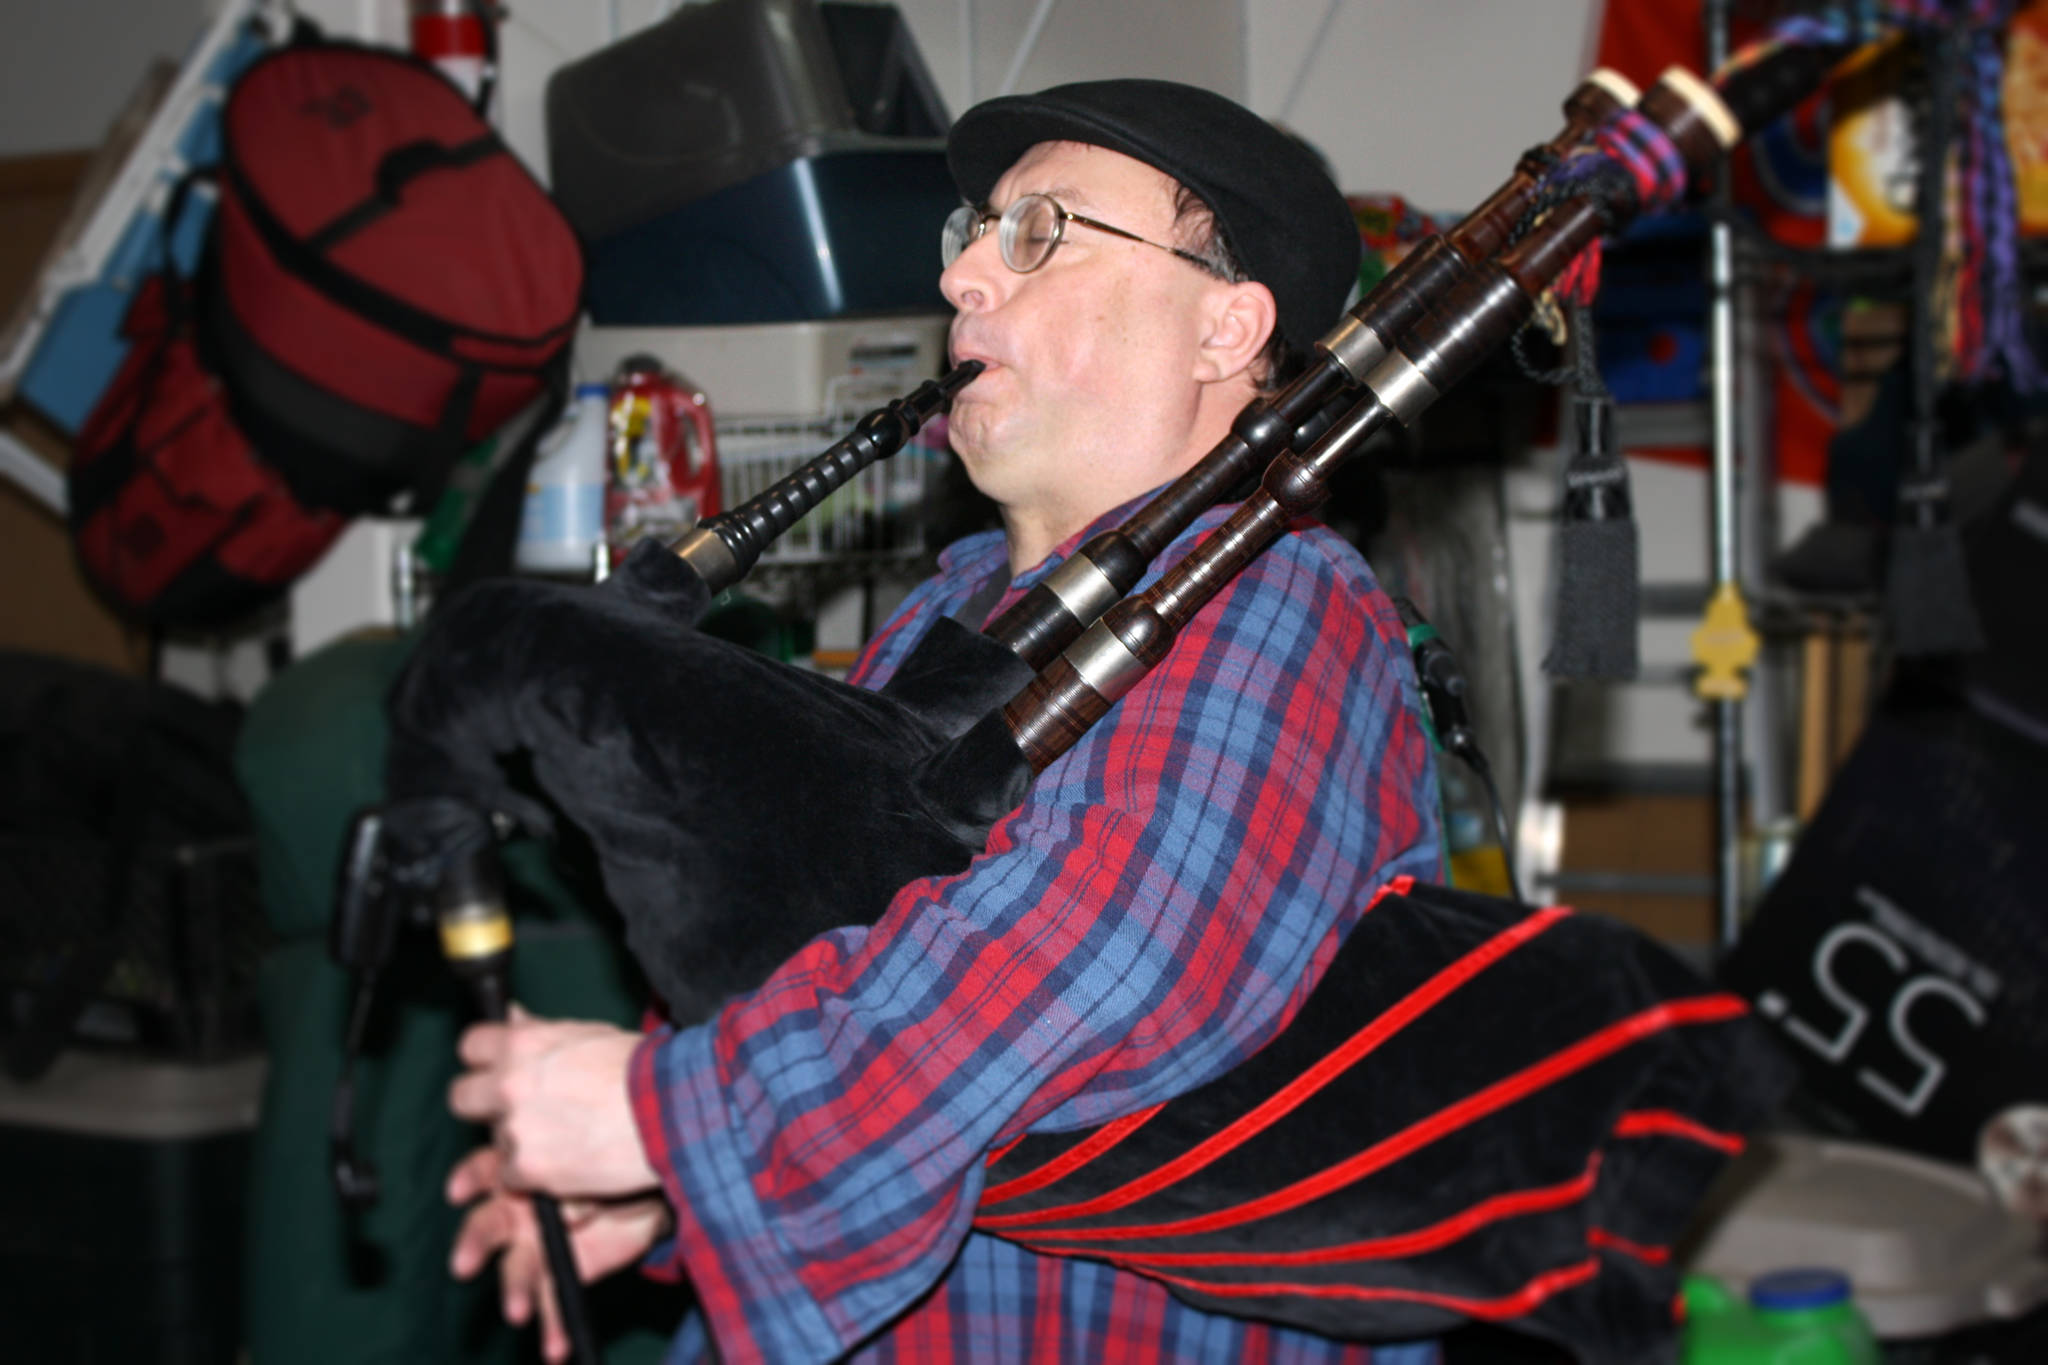 Mike Barnhill plays bagpipes during a Fire on McGinnis practice Saturday, March 9, 2019. (Ben Hohenstatt | Capital City Weekly)